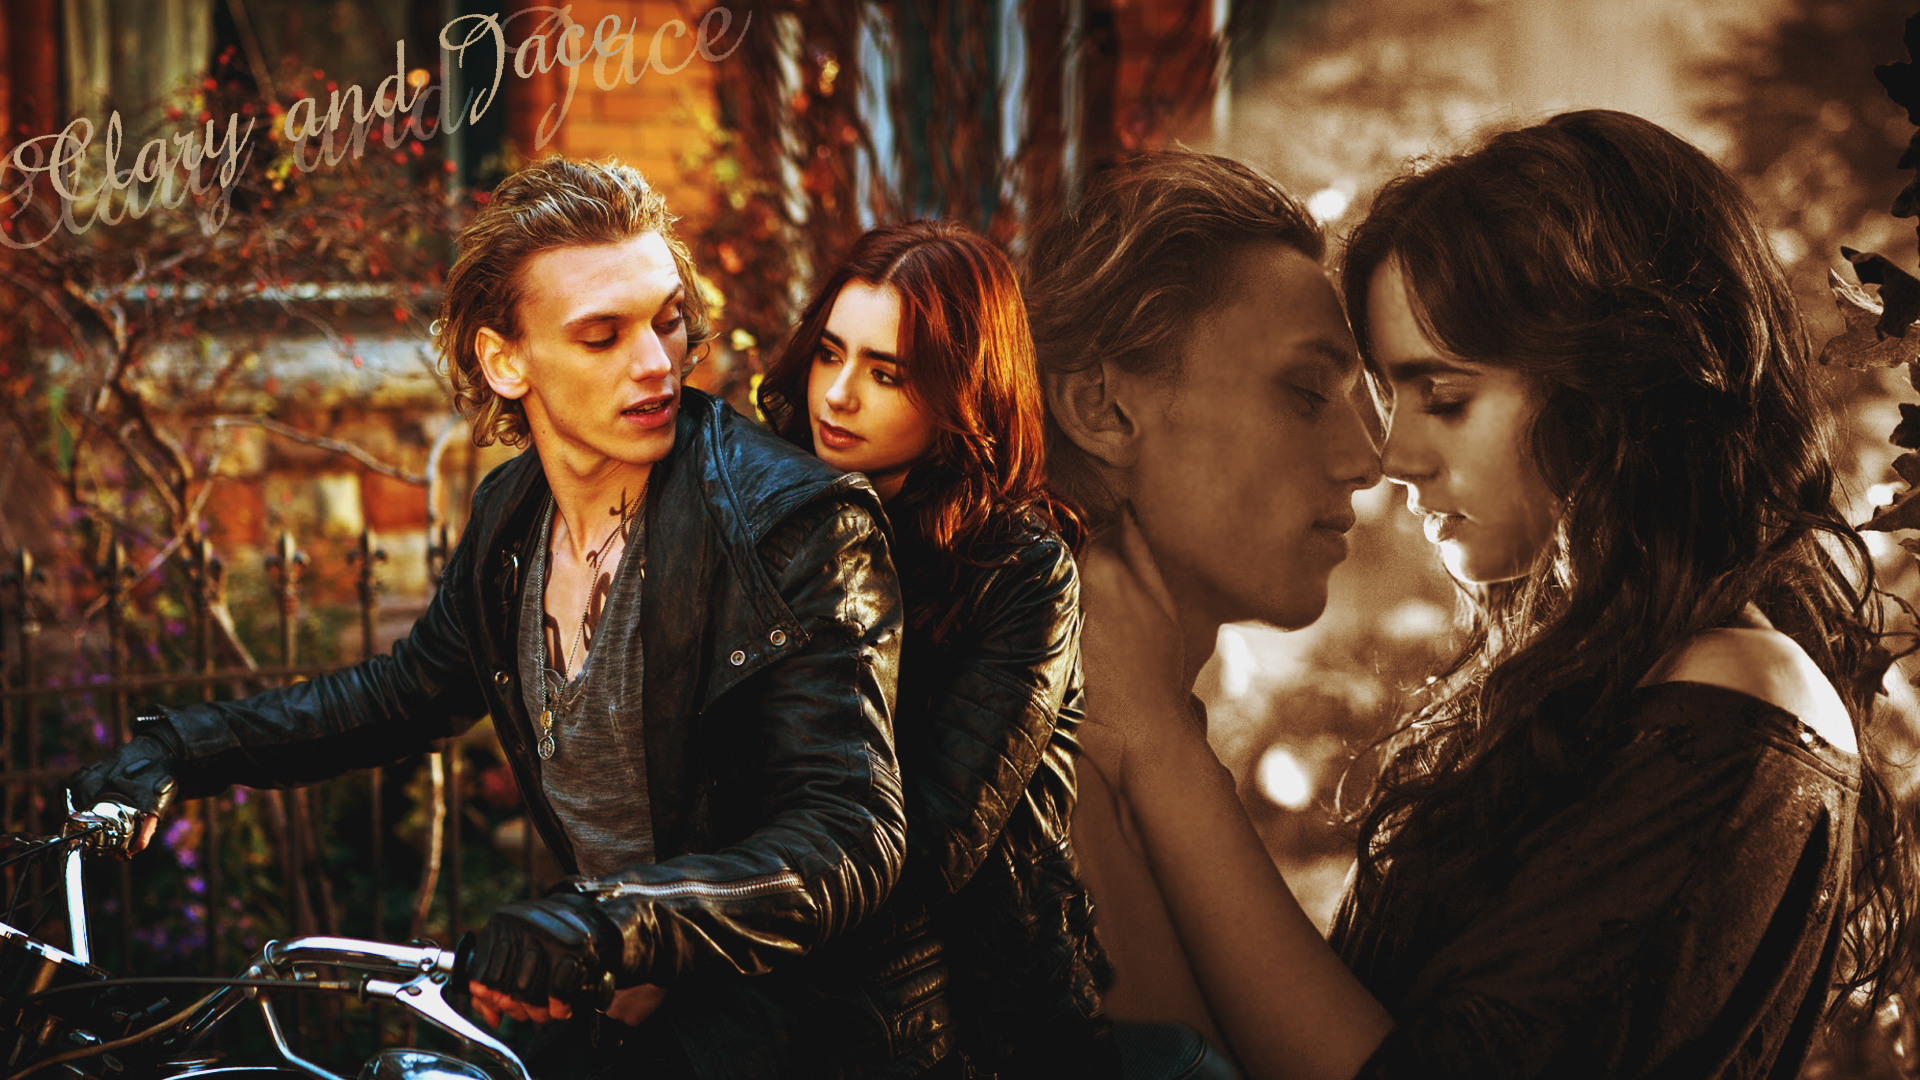 Clary and Jace wallpaper .com